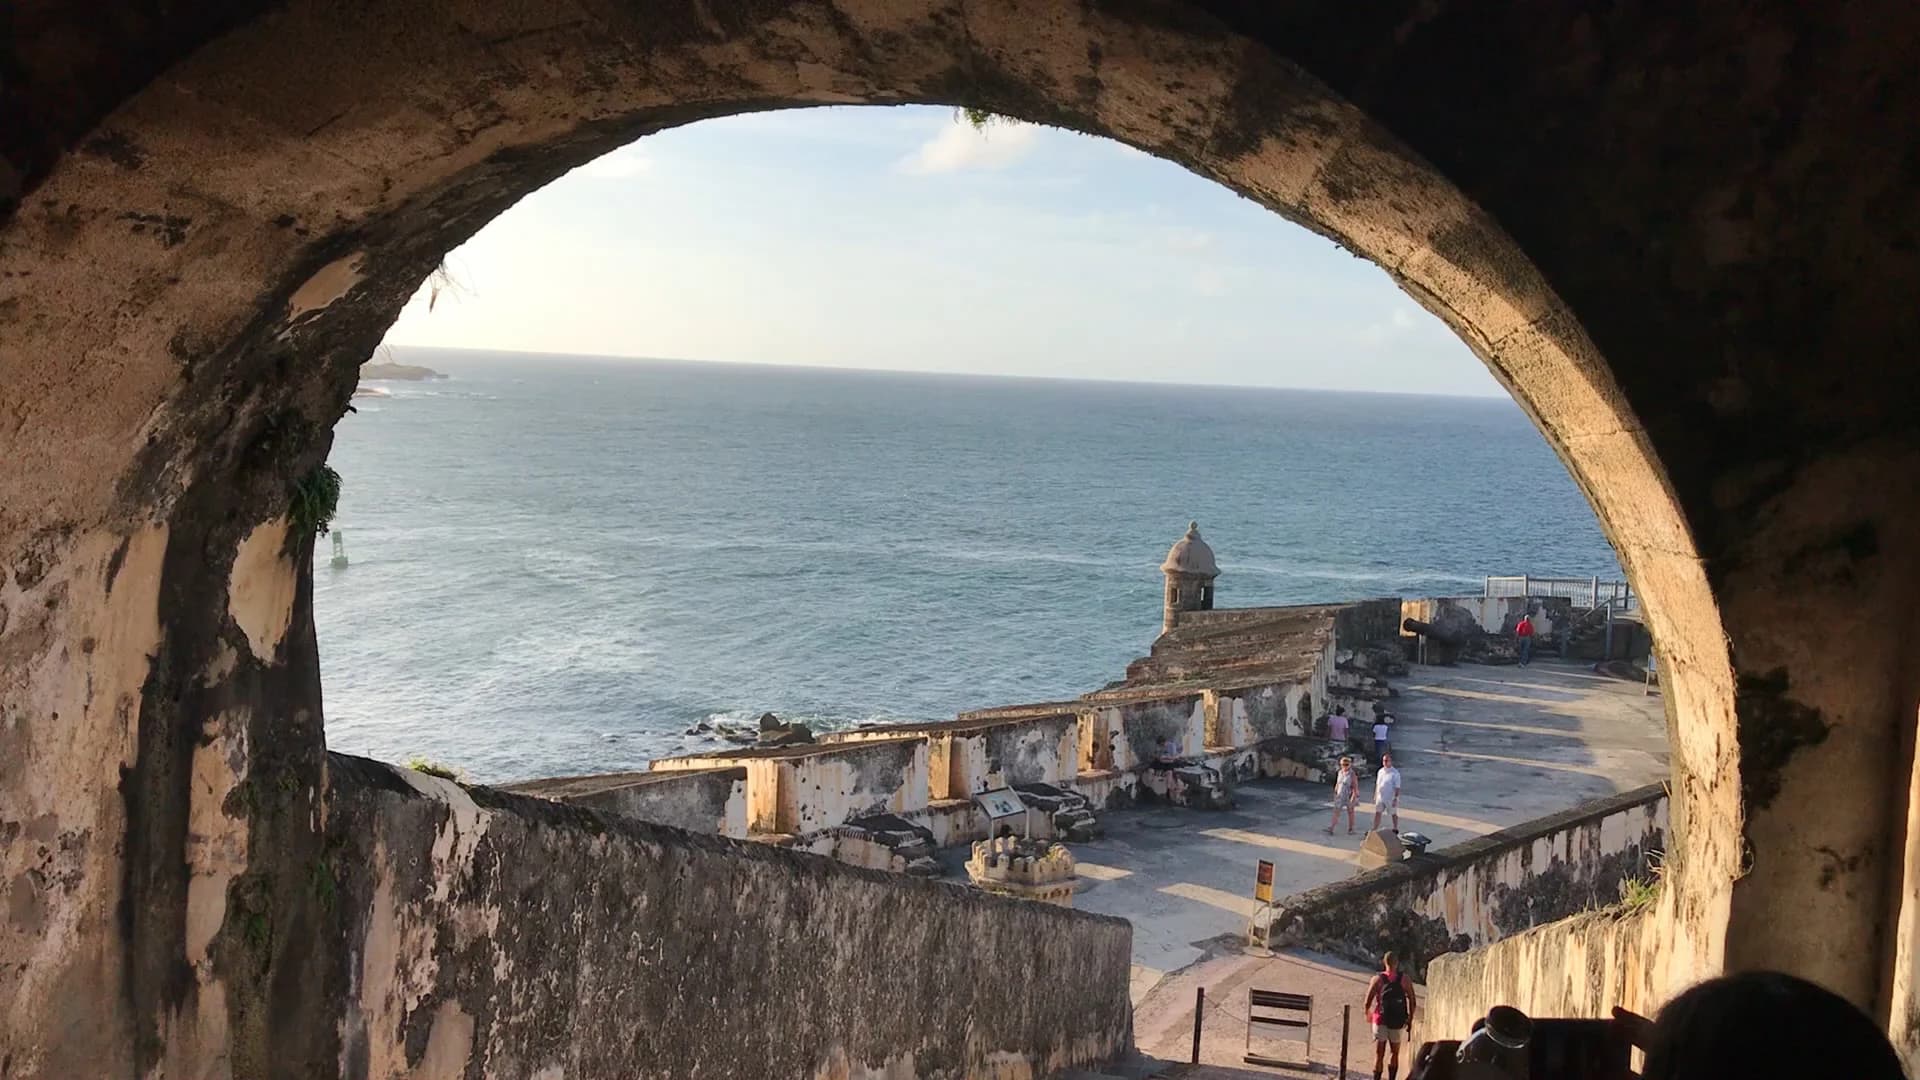 Visit Puerto Rico from the comfort of your home with 3 virtual tours